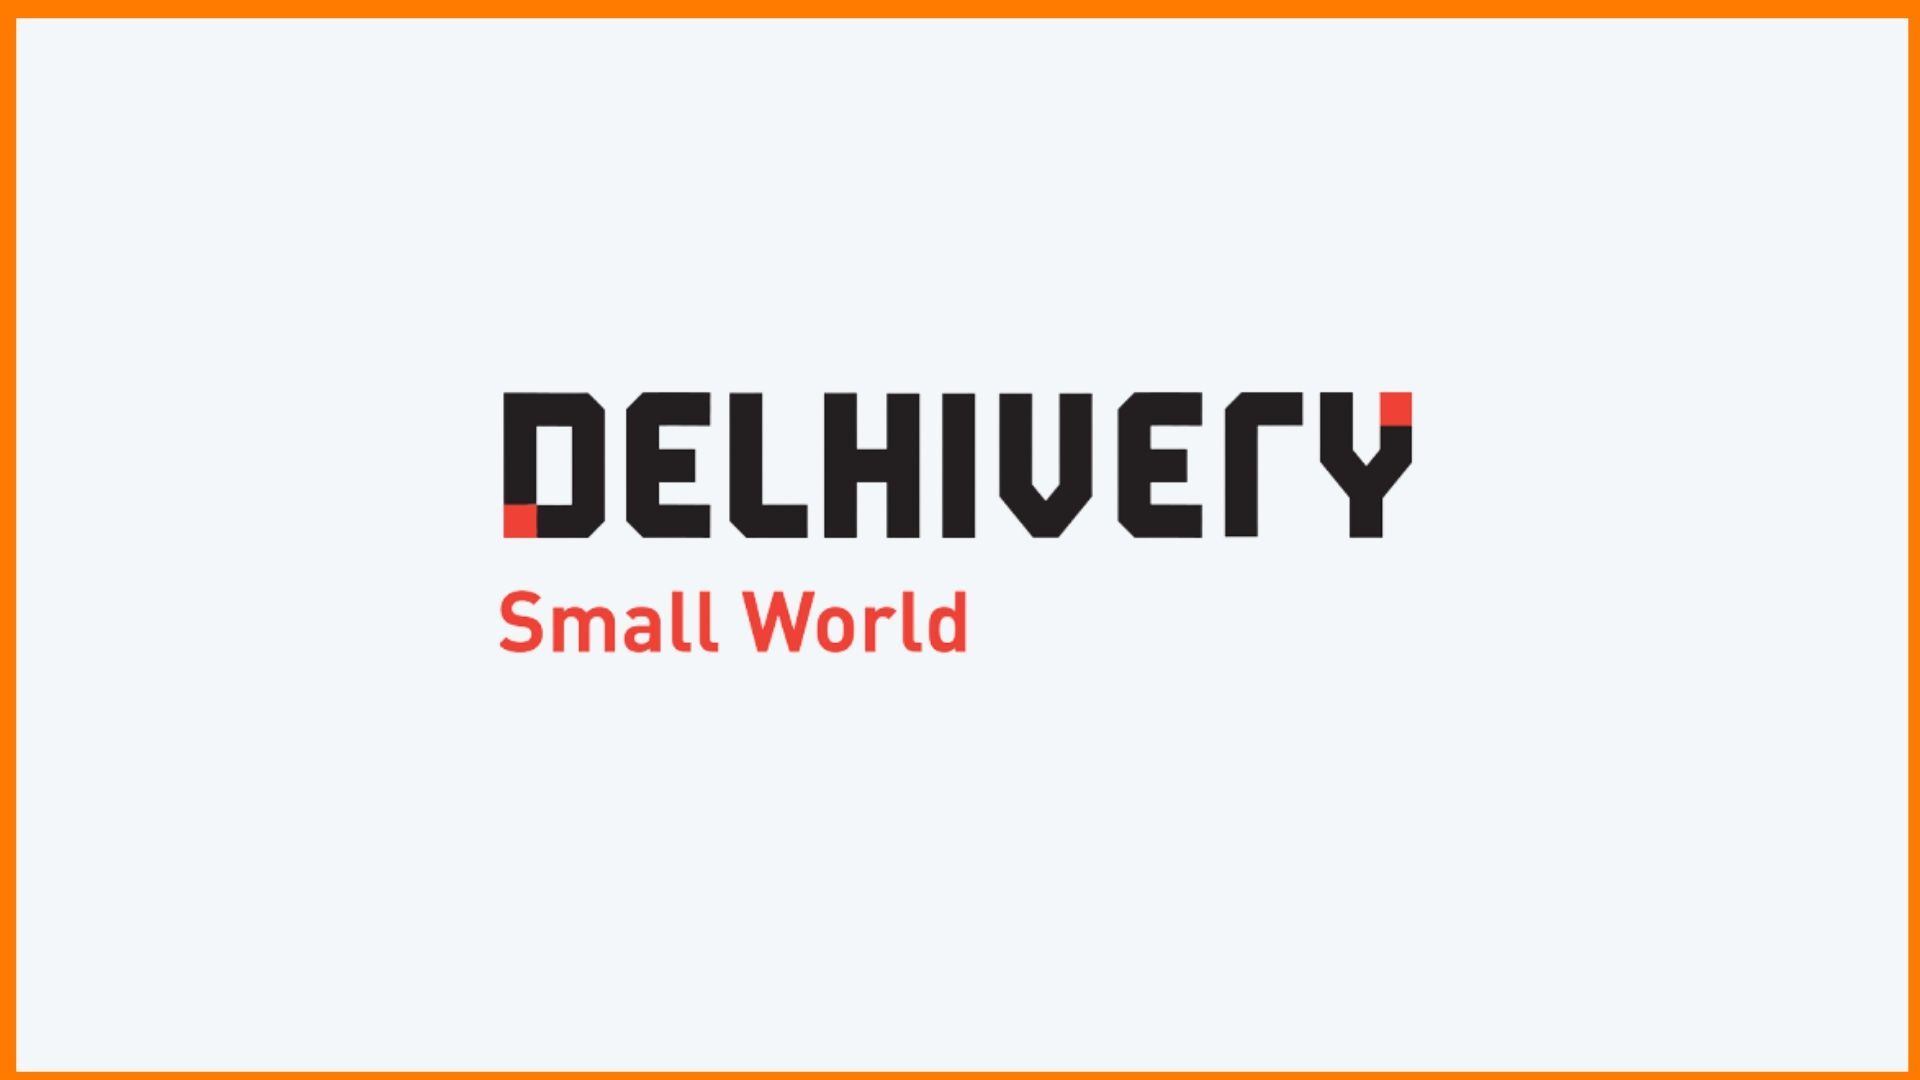 Delhivery - The Startup Which Took India by Storm!